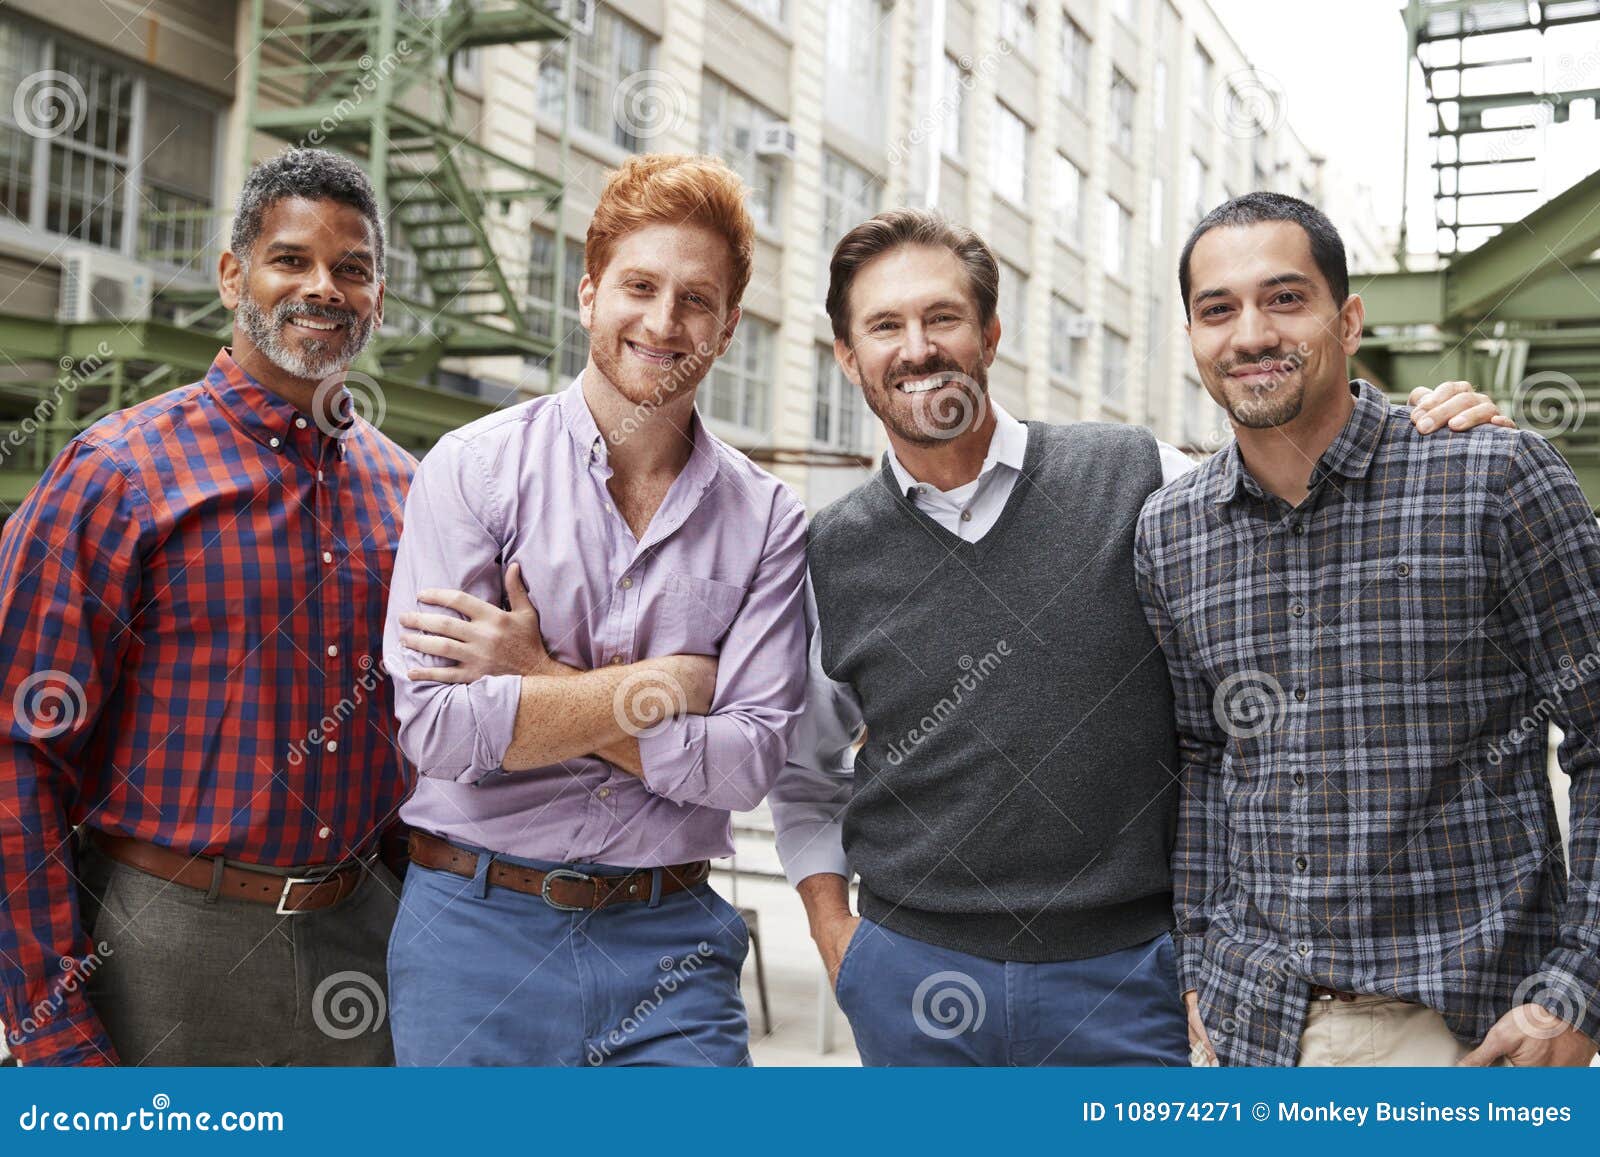 four male coworkers smiling to camera outside